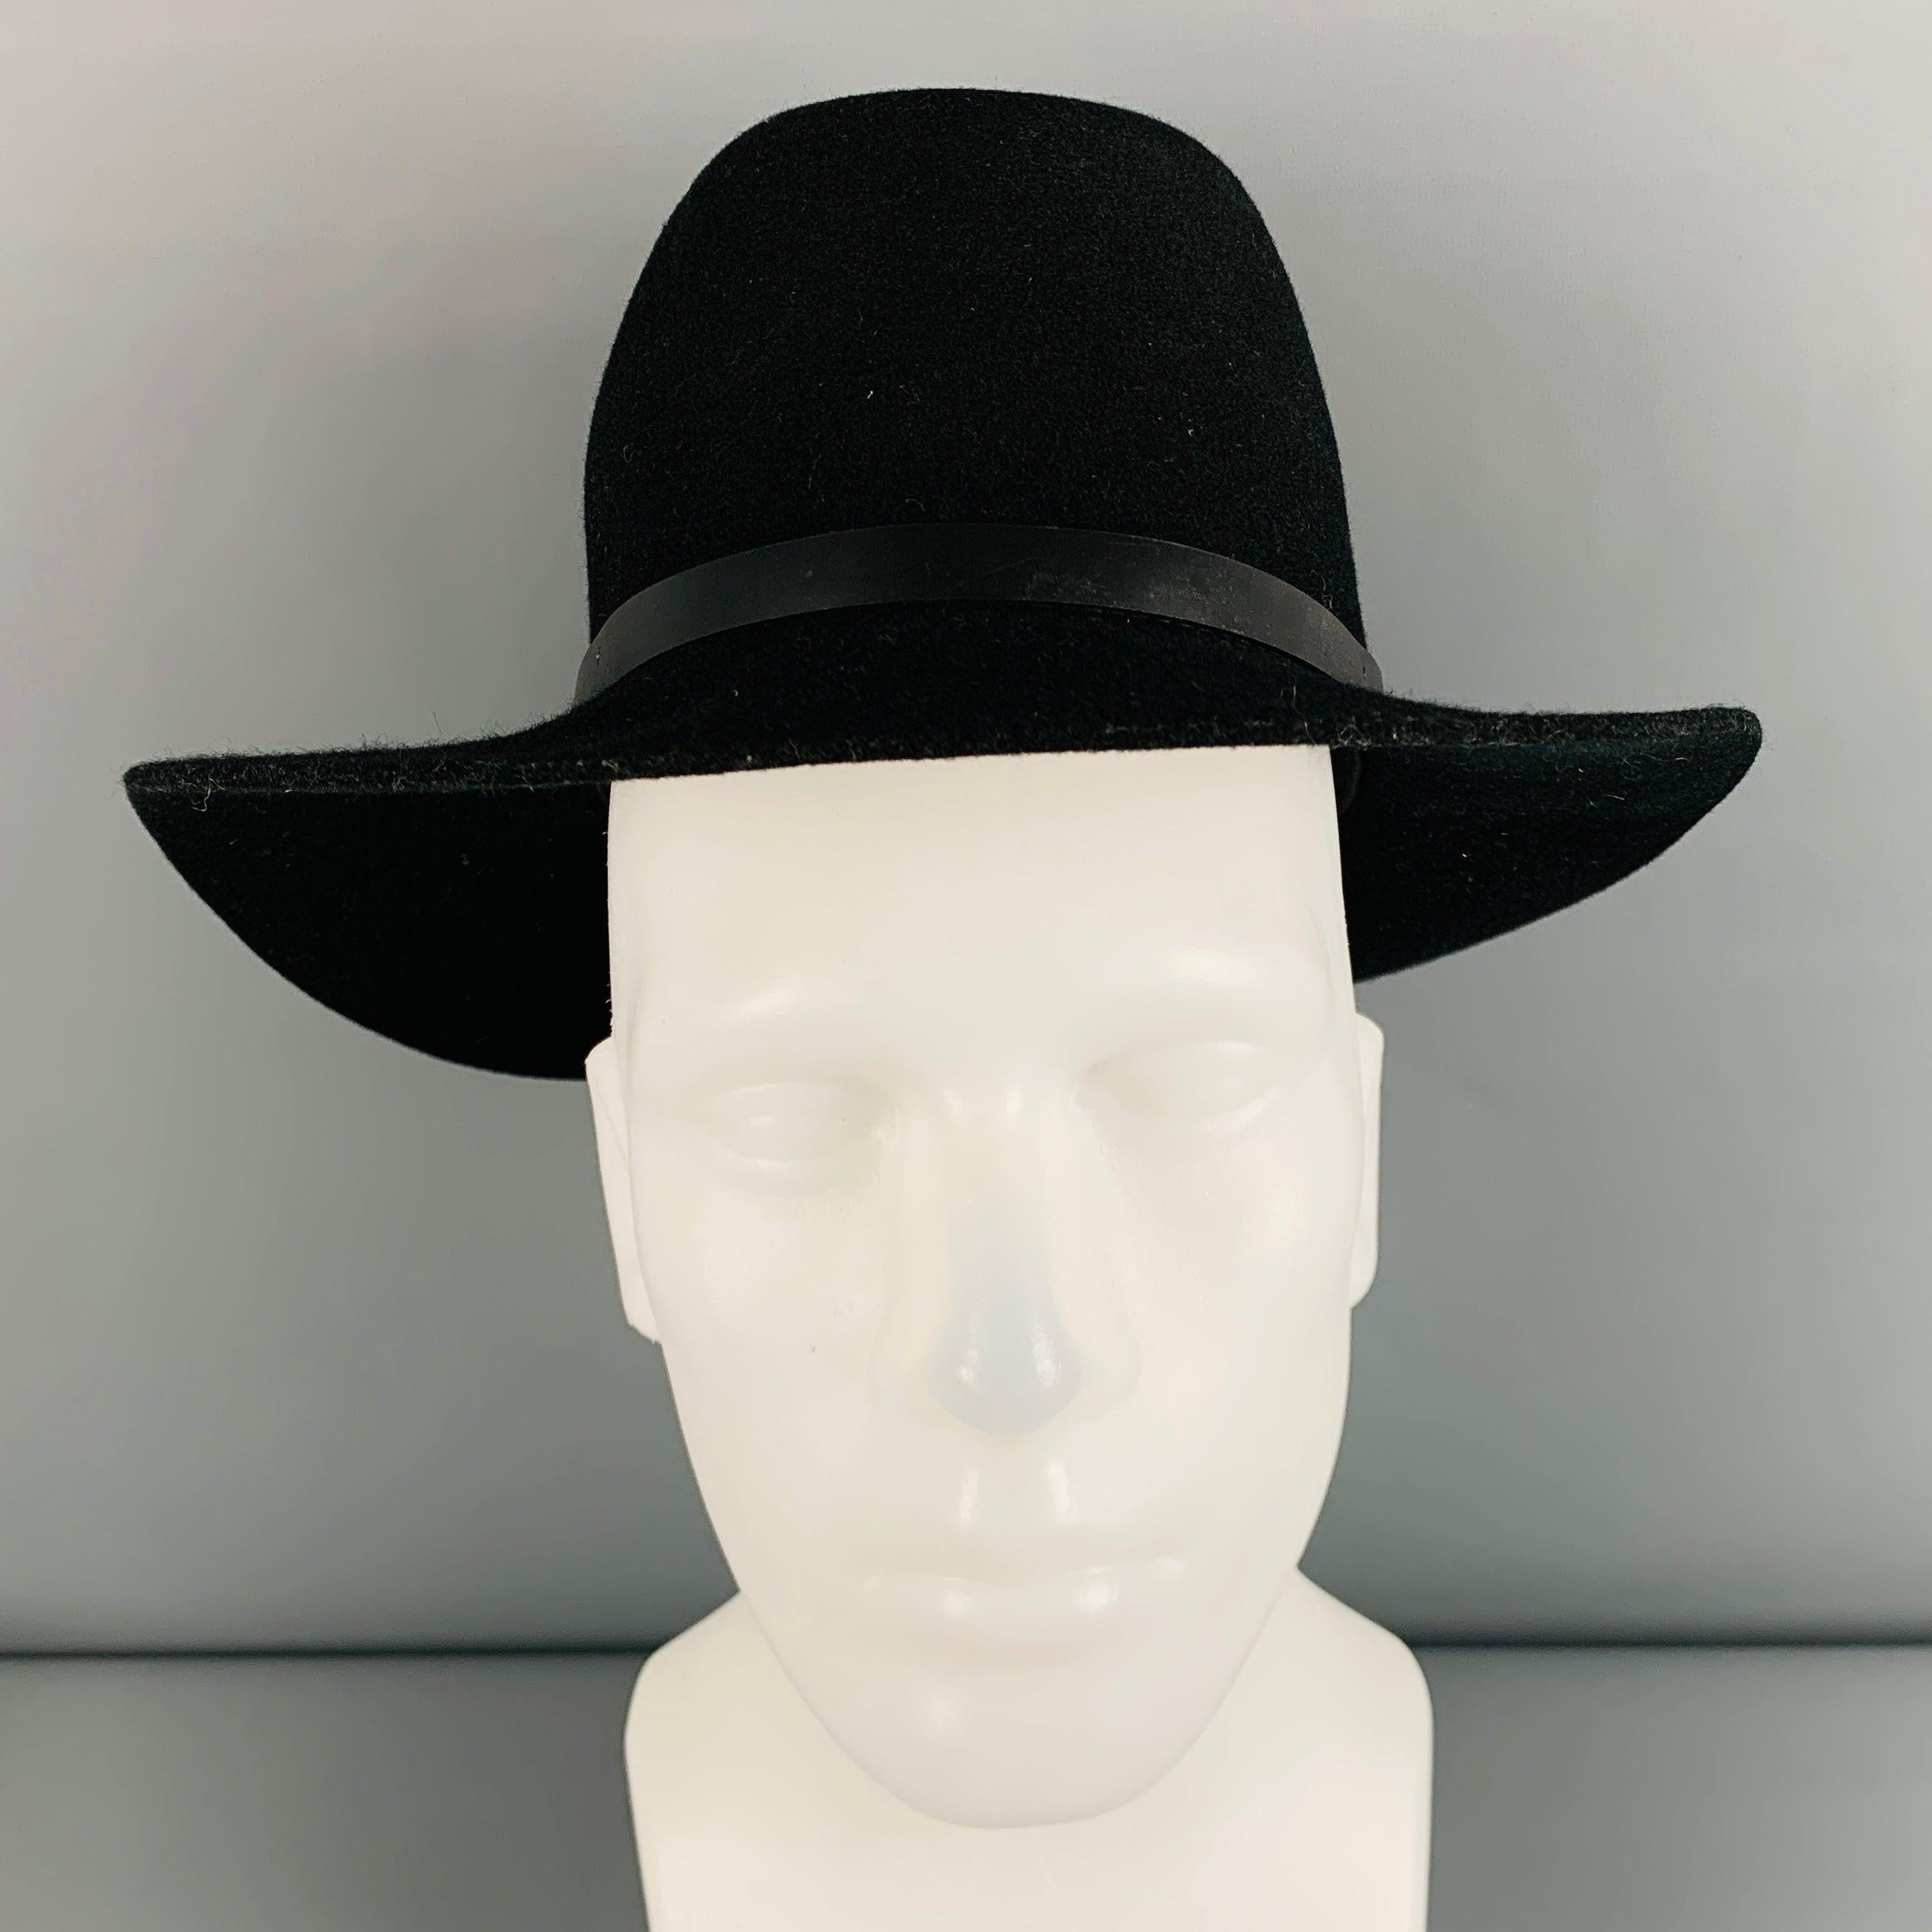 RAG & BONE
hat in a black wool felt fabric featuring thin leather trim with gold tone stud detail.Very Good Pre-Owned Condition. Minor signs of wear. 

Marked:   S 

Measurements: 
  Opening: 22 inches Brim: 2.75 inches Height: 5.5 inches 
  
  
